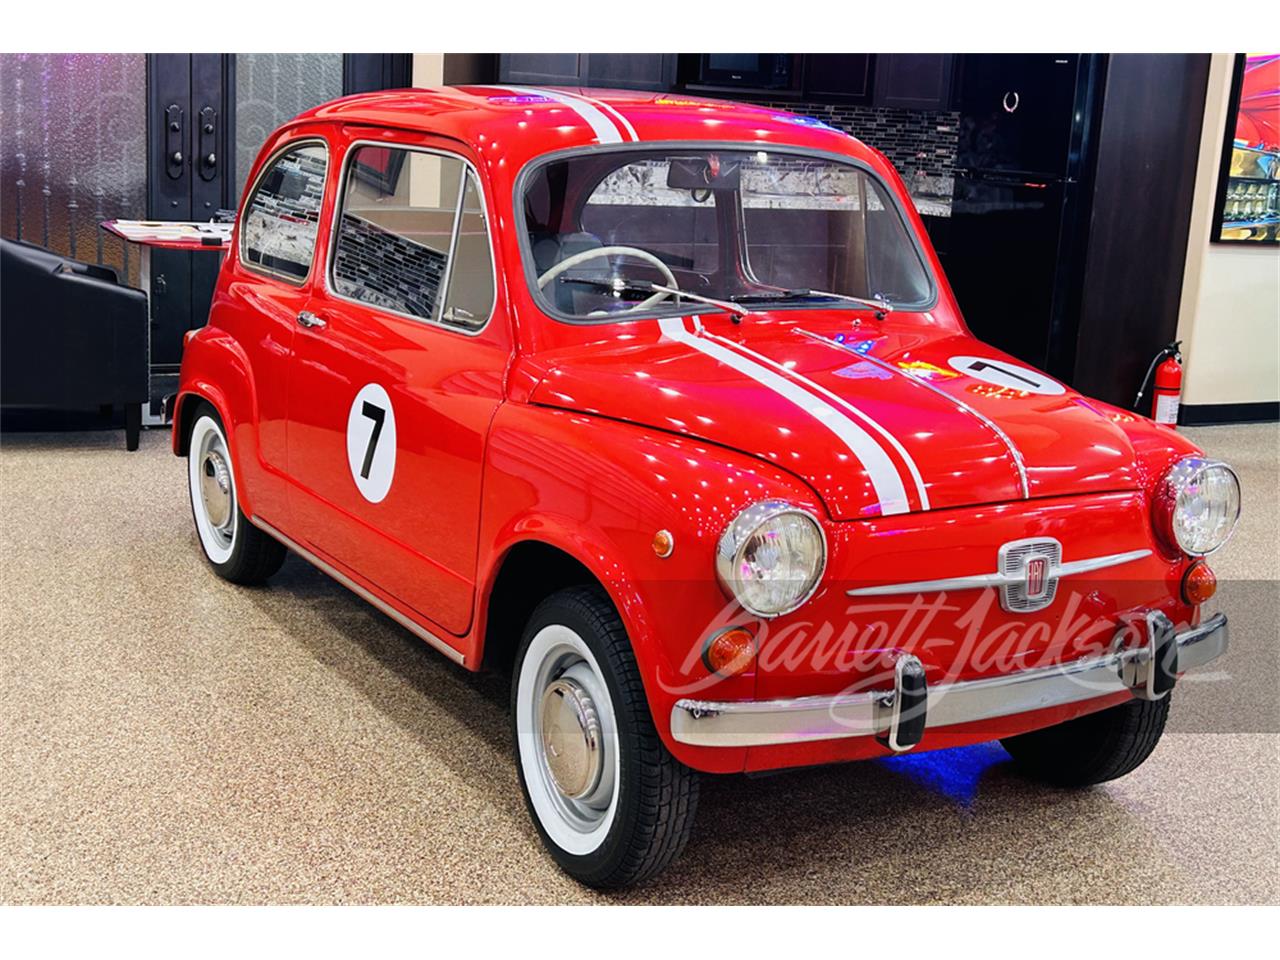 For Sale at Auction: 1969 Fiat 600 in Scottsdale, Arizona for sale in Scottsdale, AZ